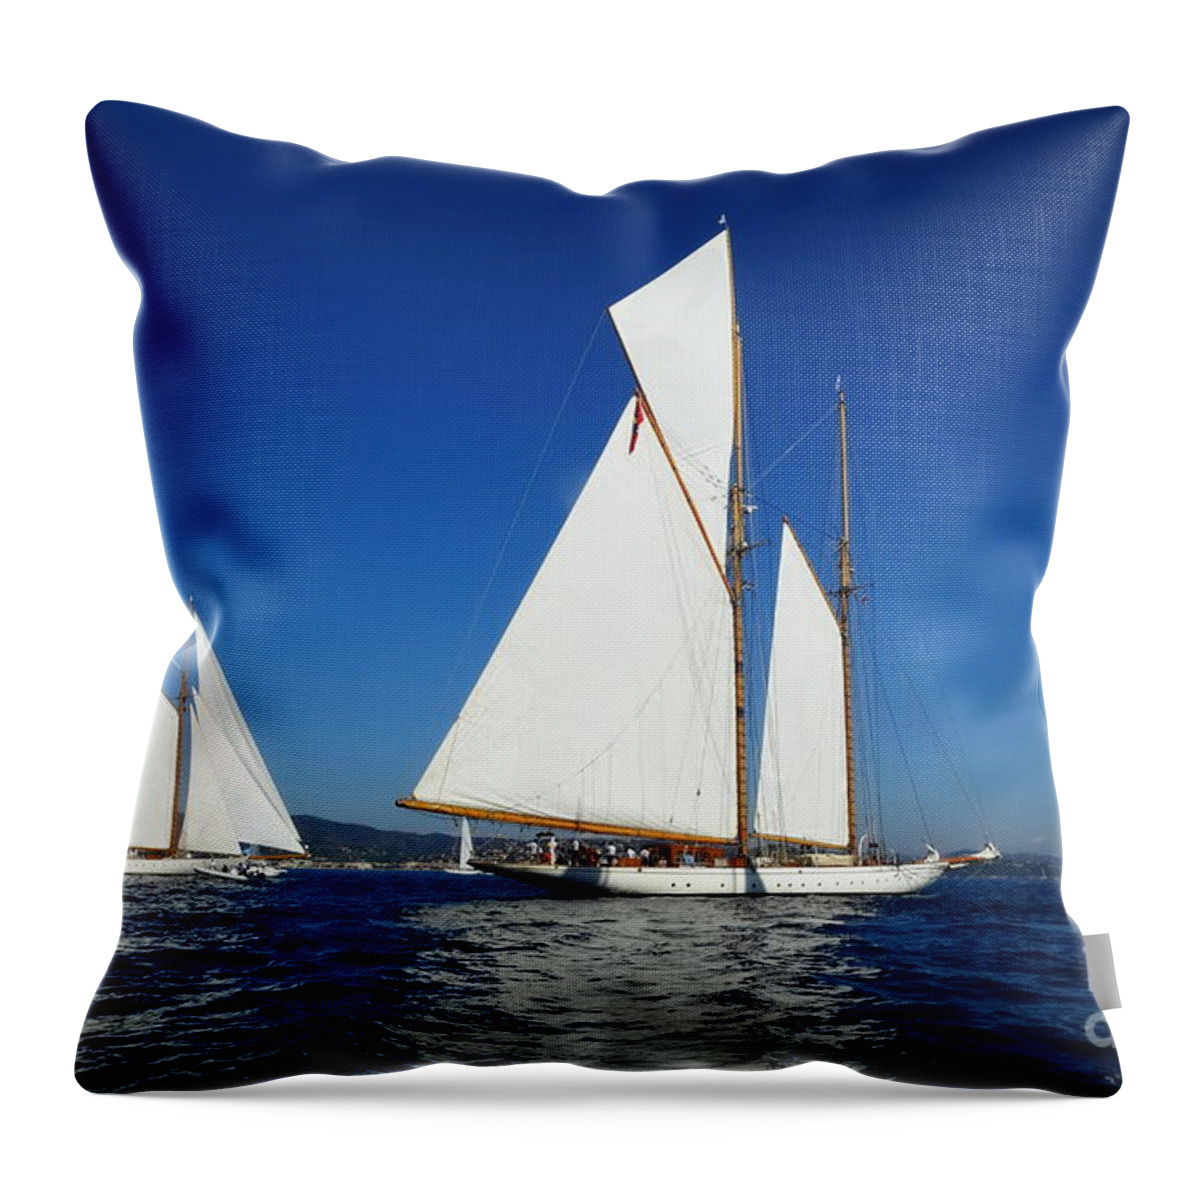 Les Voiles De St. Tropez 2017 Throw Pillow featuring the photograph Three Schooners by Lainie Wrightson